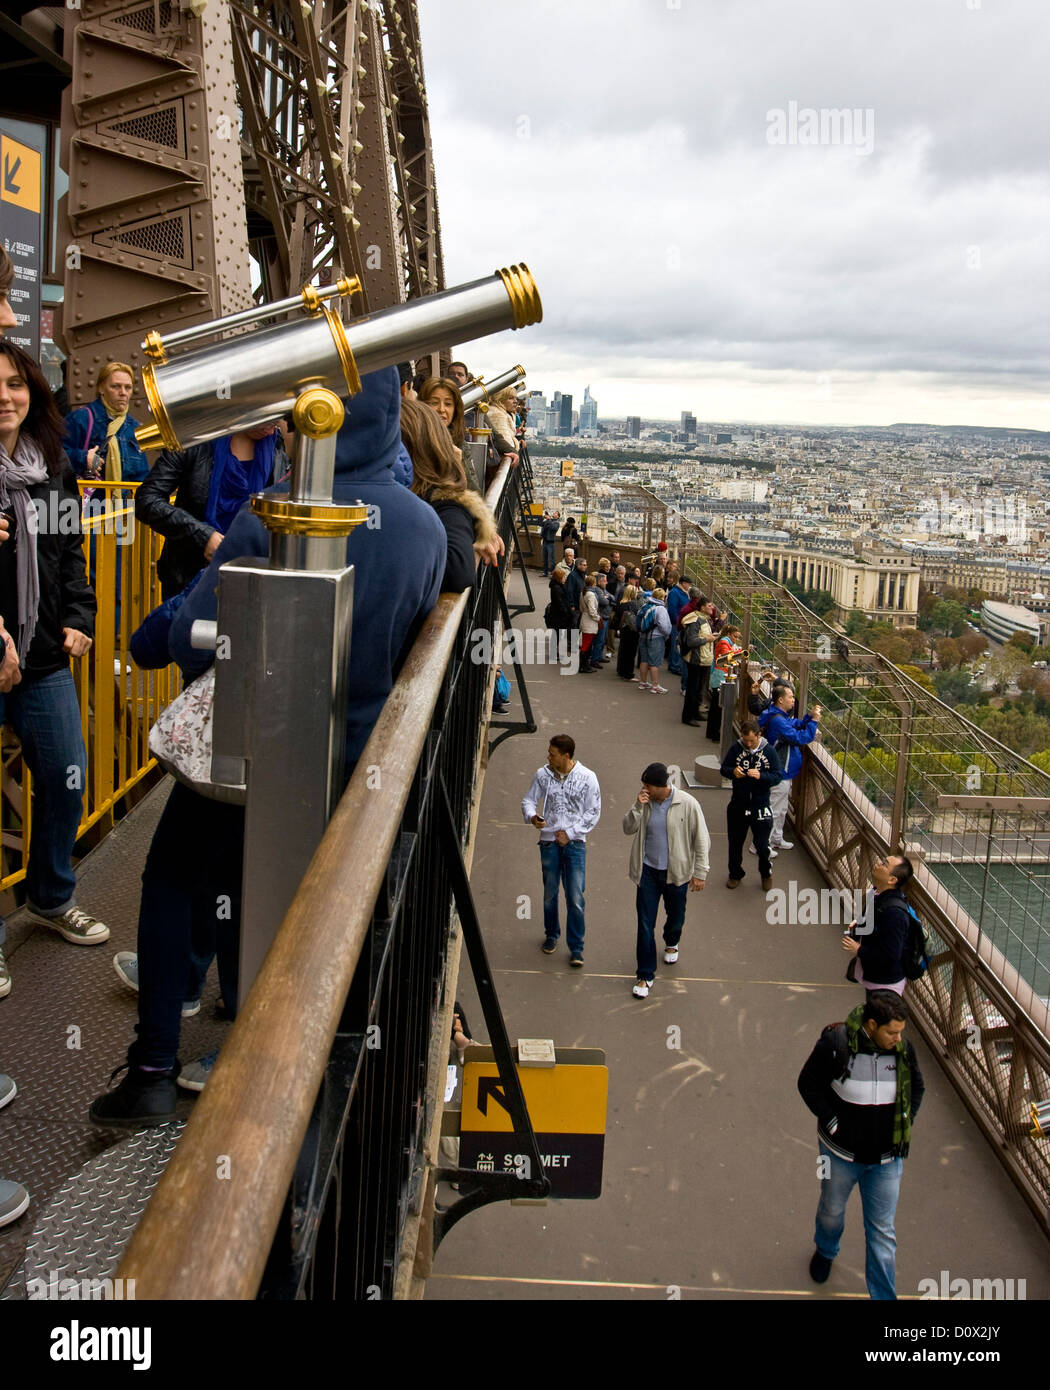 Paris, France - March 31, 2019: People Visit Eiffel Tower Observation Deck.  Stock Photo, Picture and Royalty Free Image. Image 123681853.